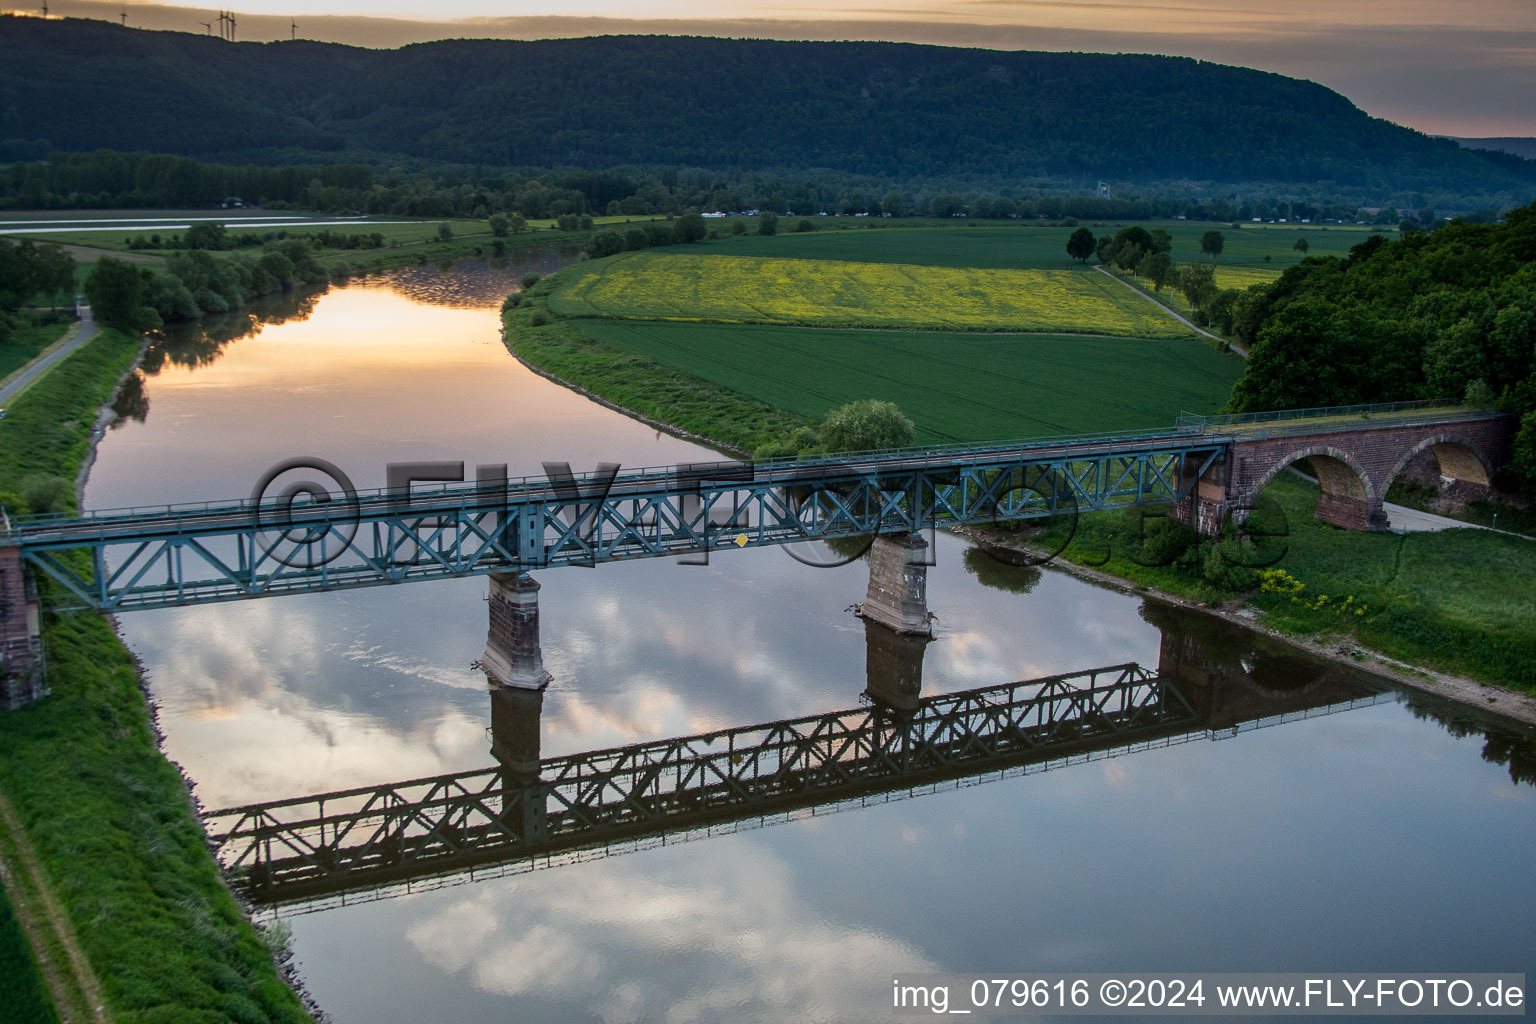 Viaduct of the railway bridge structure to route the railway tracks crossing the Weser river in Hoexter in the state North Rhine-Westphalia